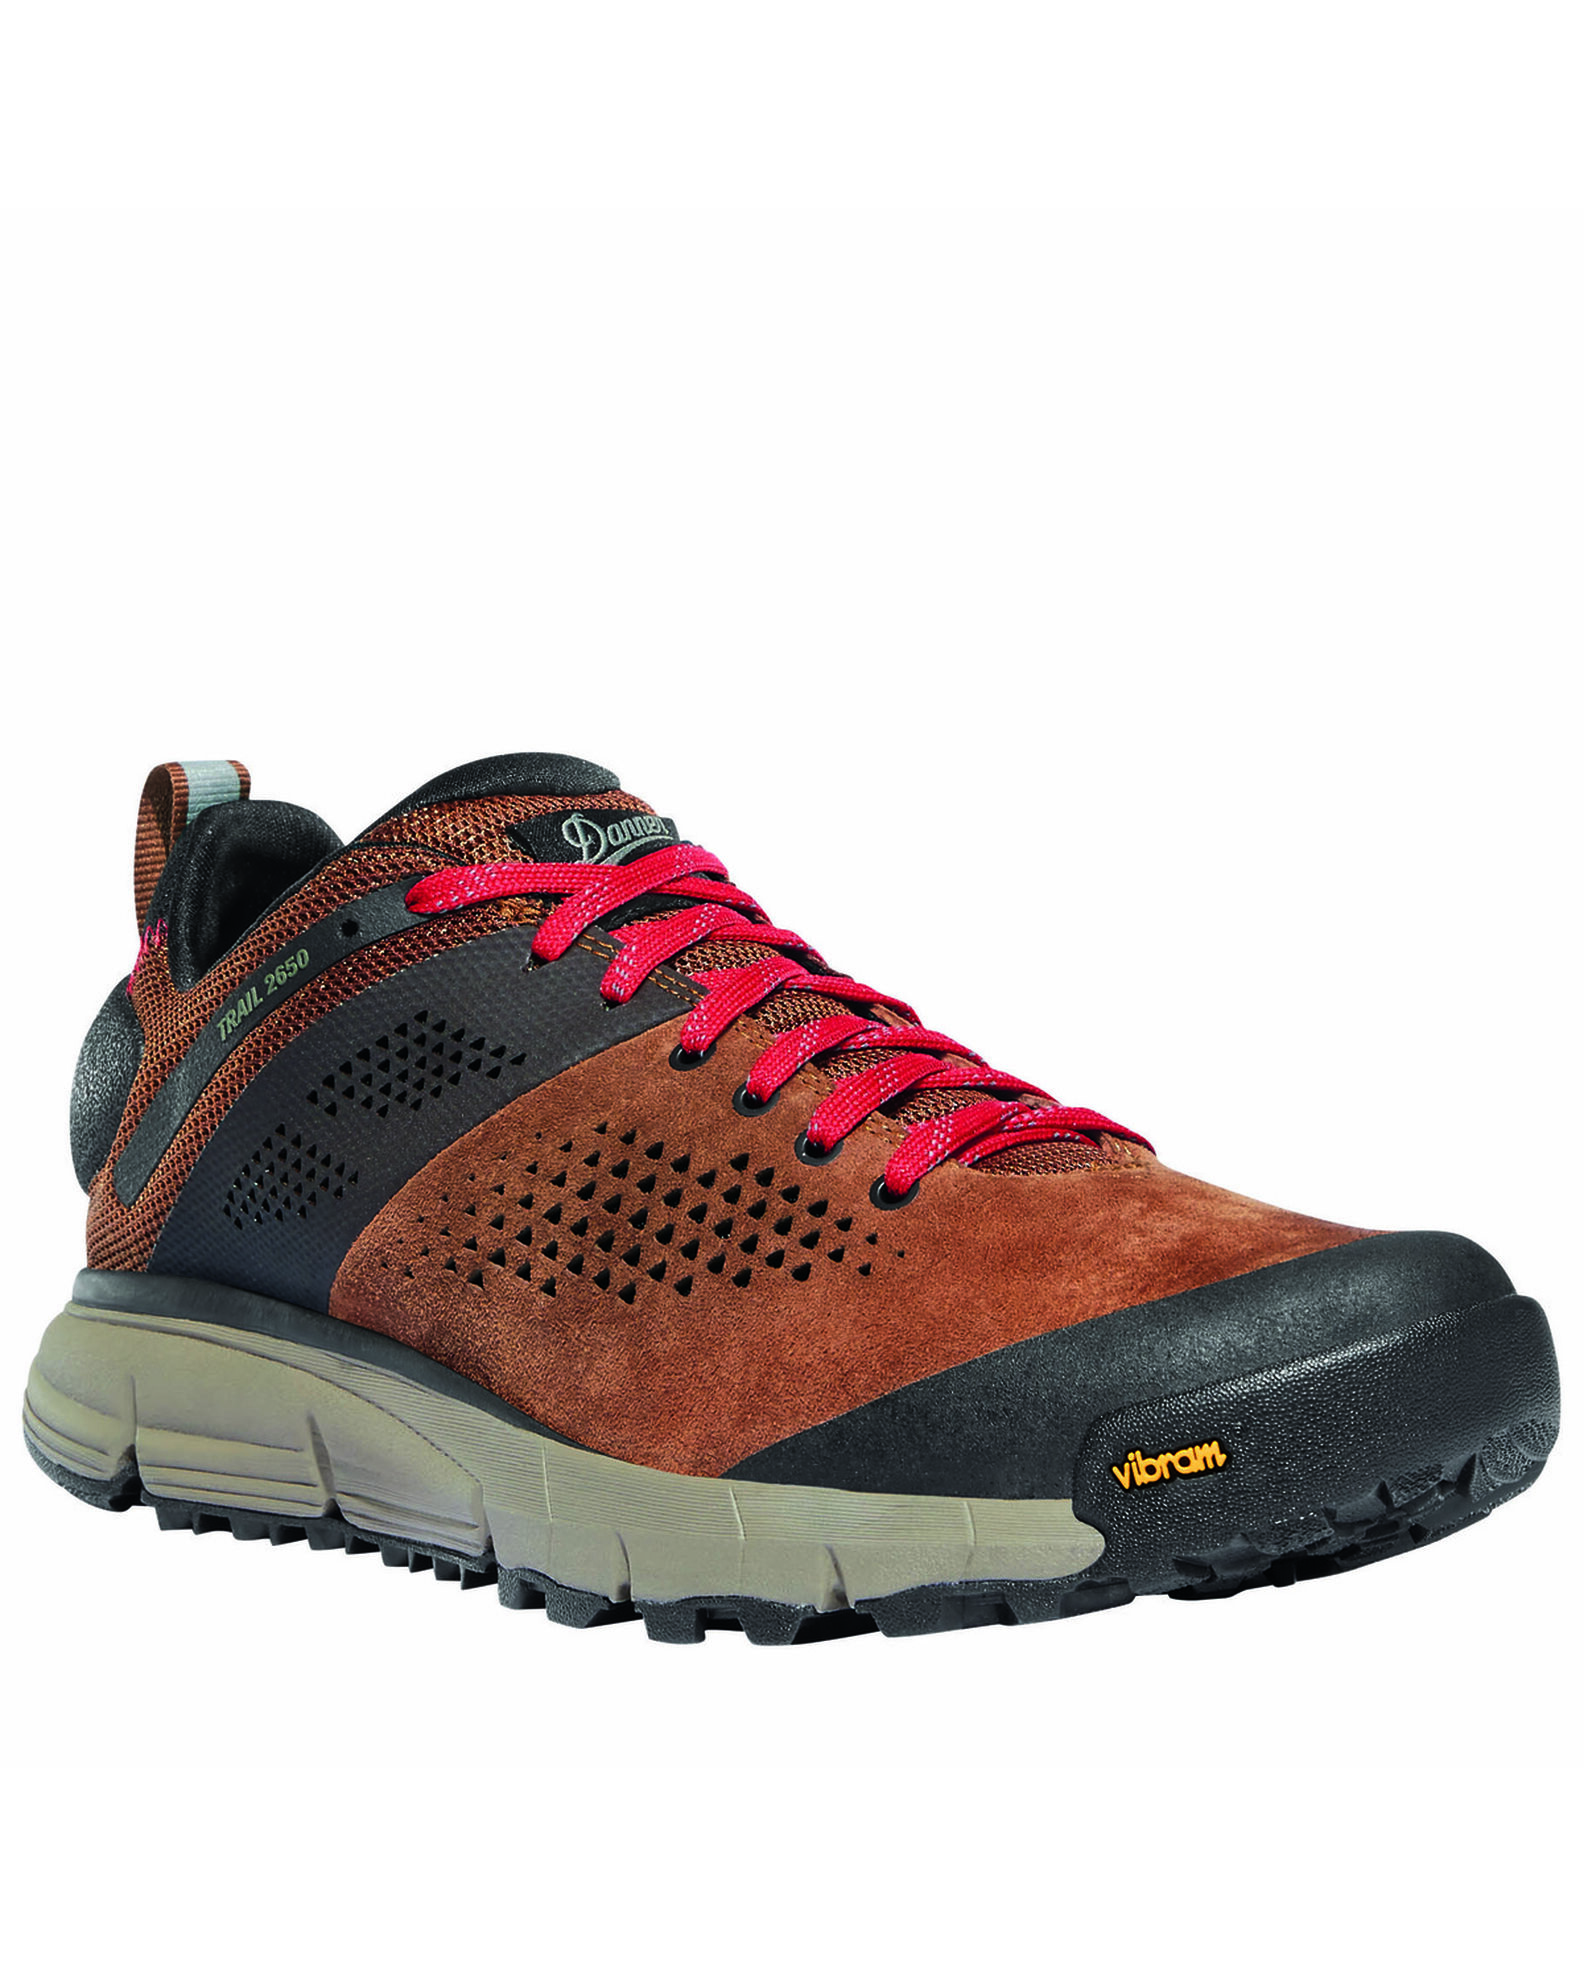 Product Name: Danner Men's Trail 2650 Hiking Shoes - Soft Toe